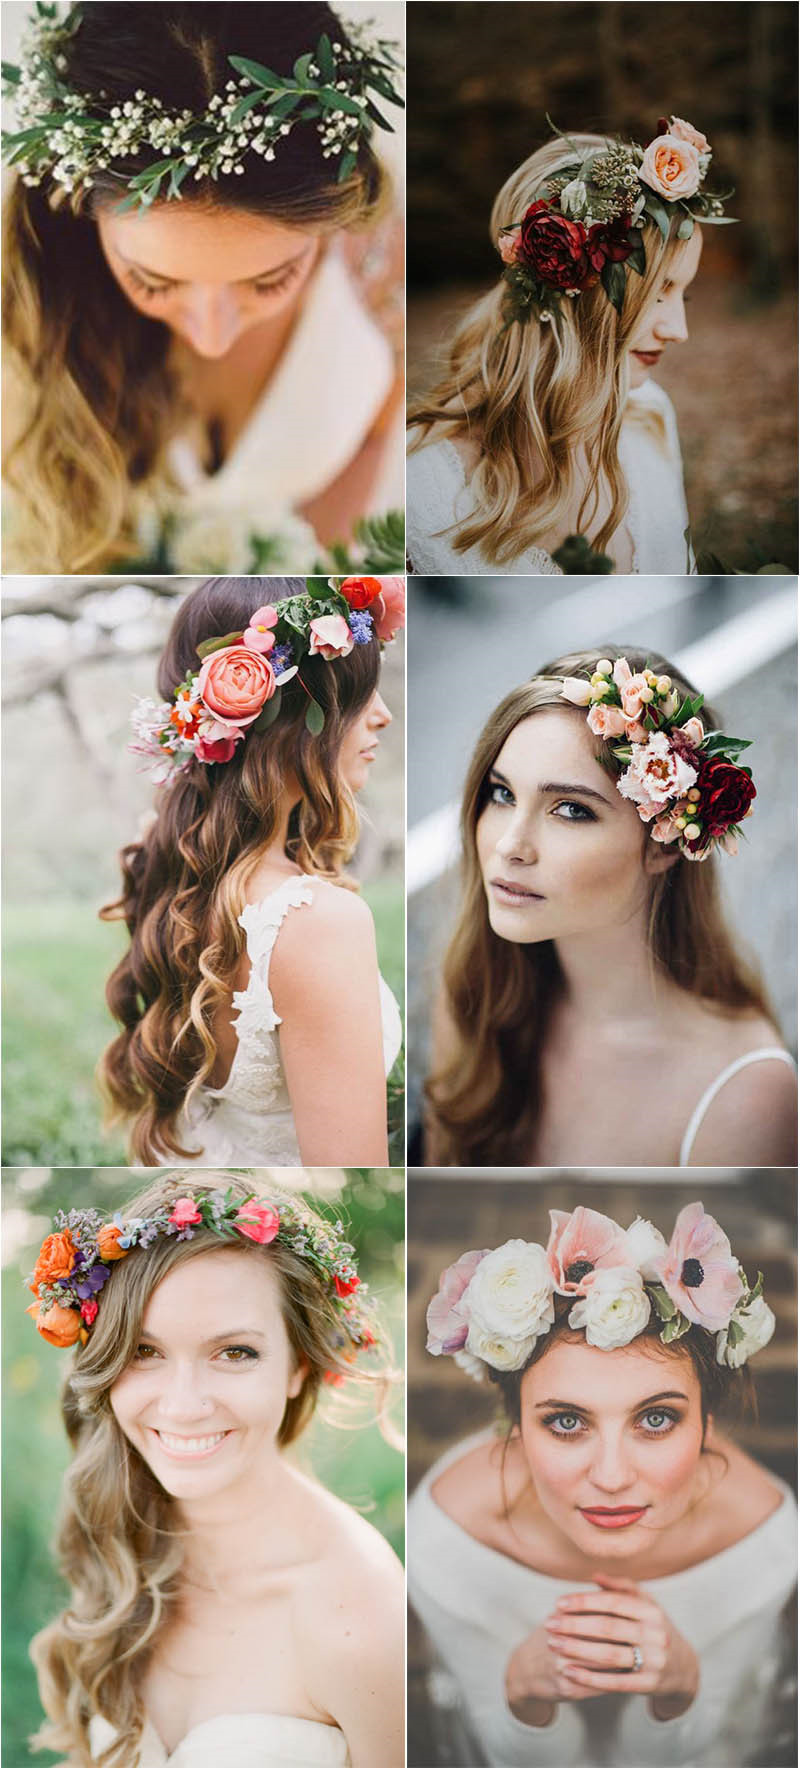 stunning floral crowns for your wedding hair